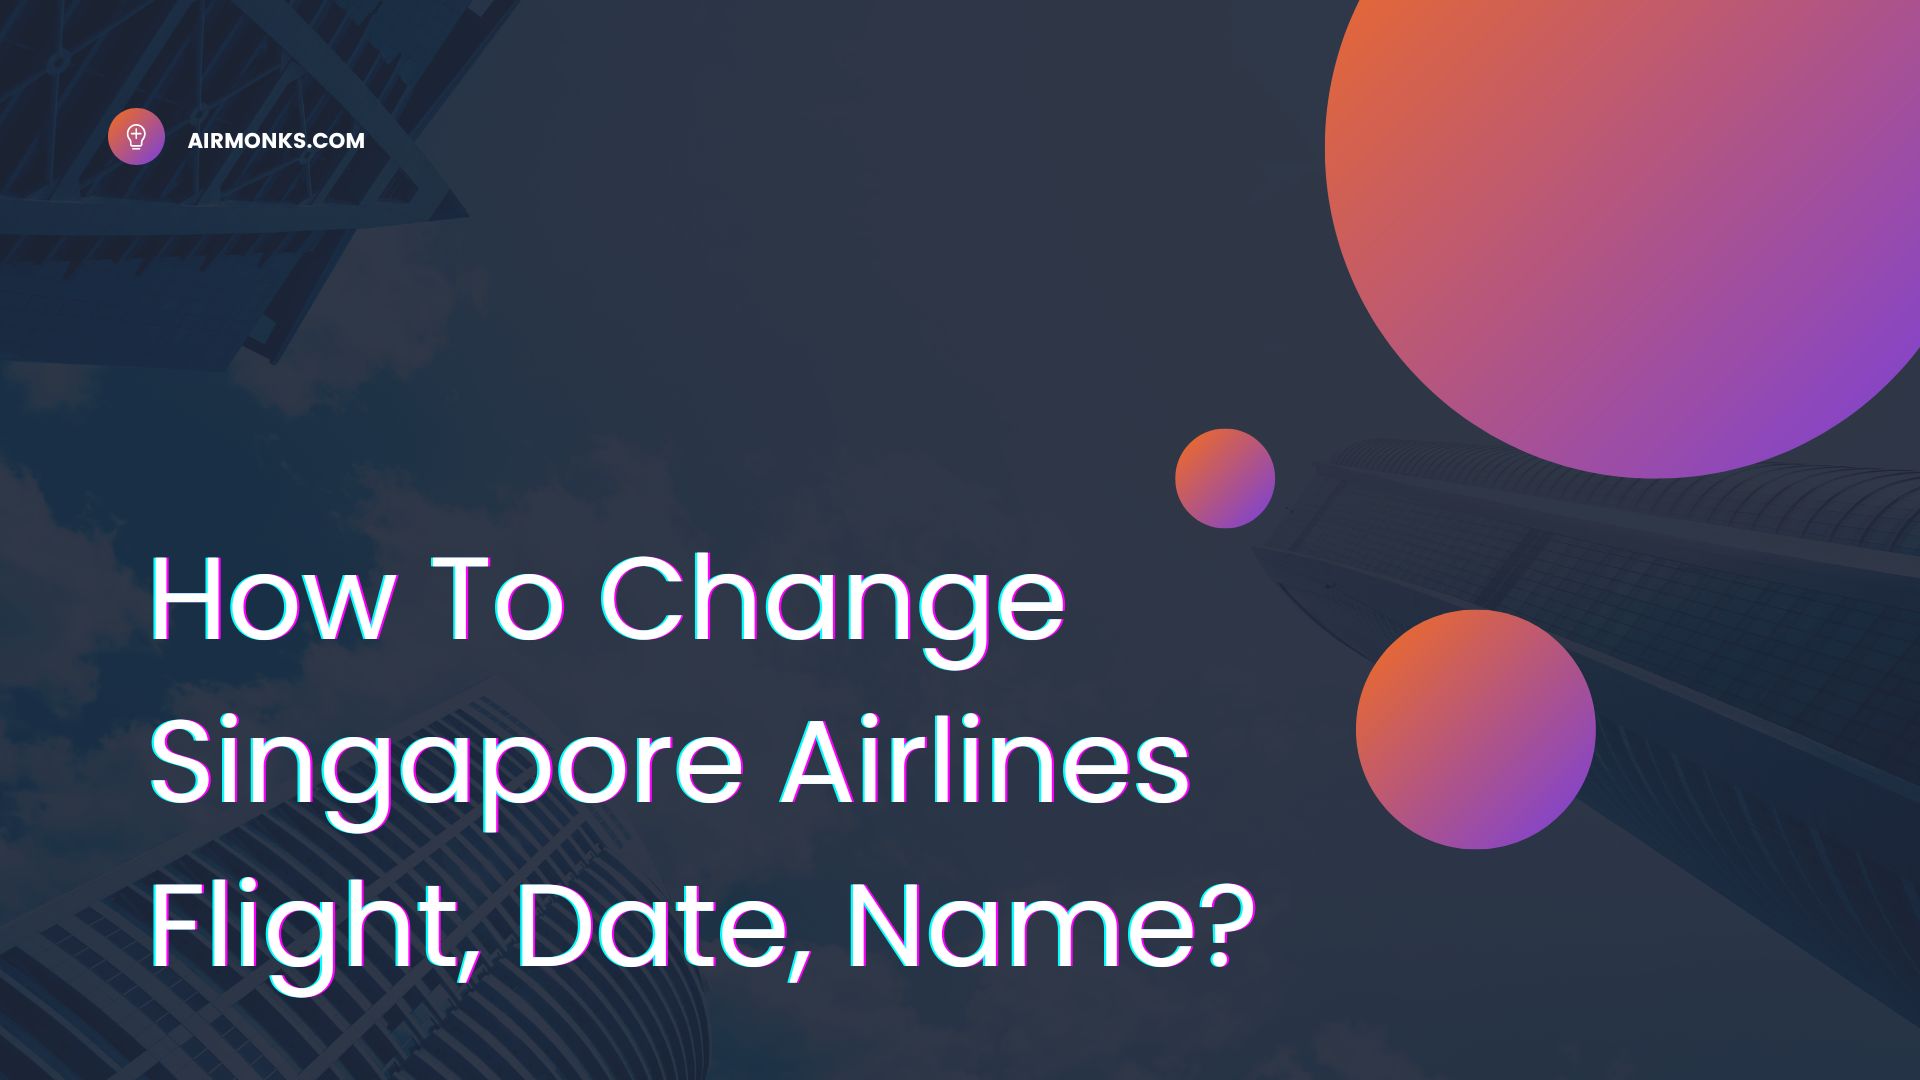 Singapore Airlines Flight Change Policy63f6044782648.jpg